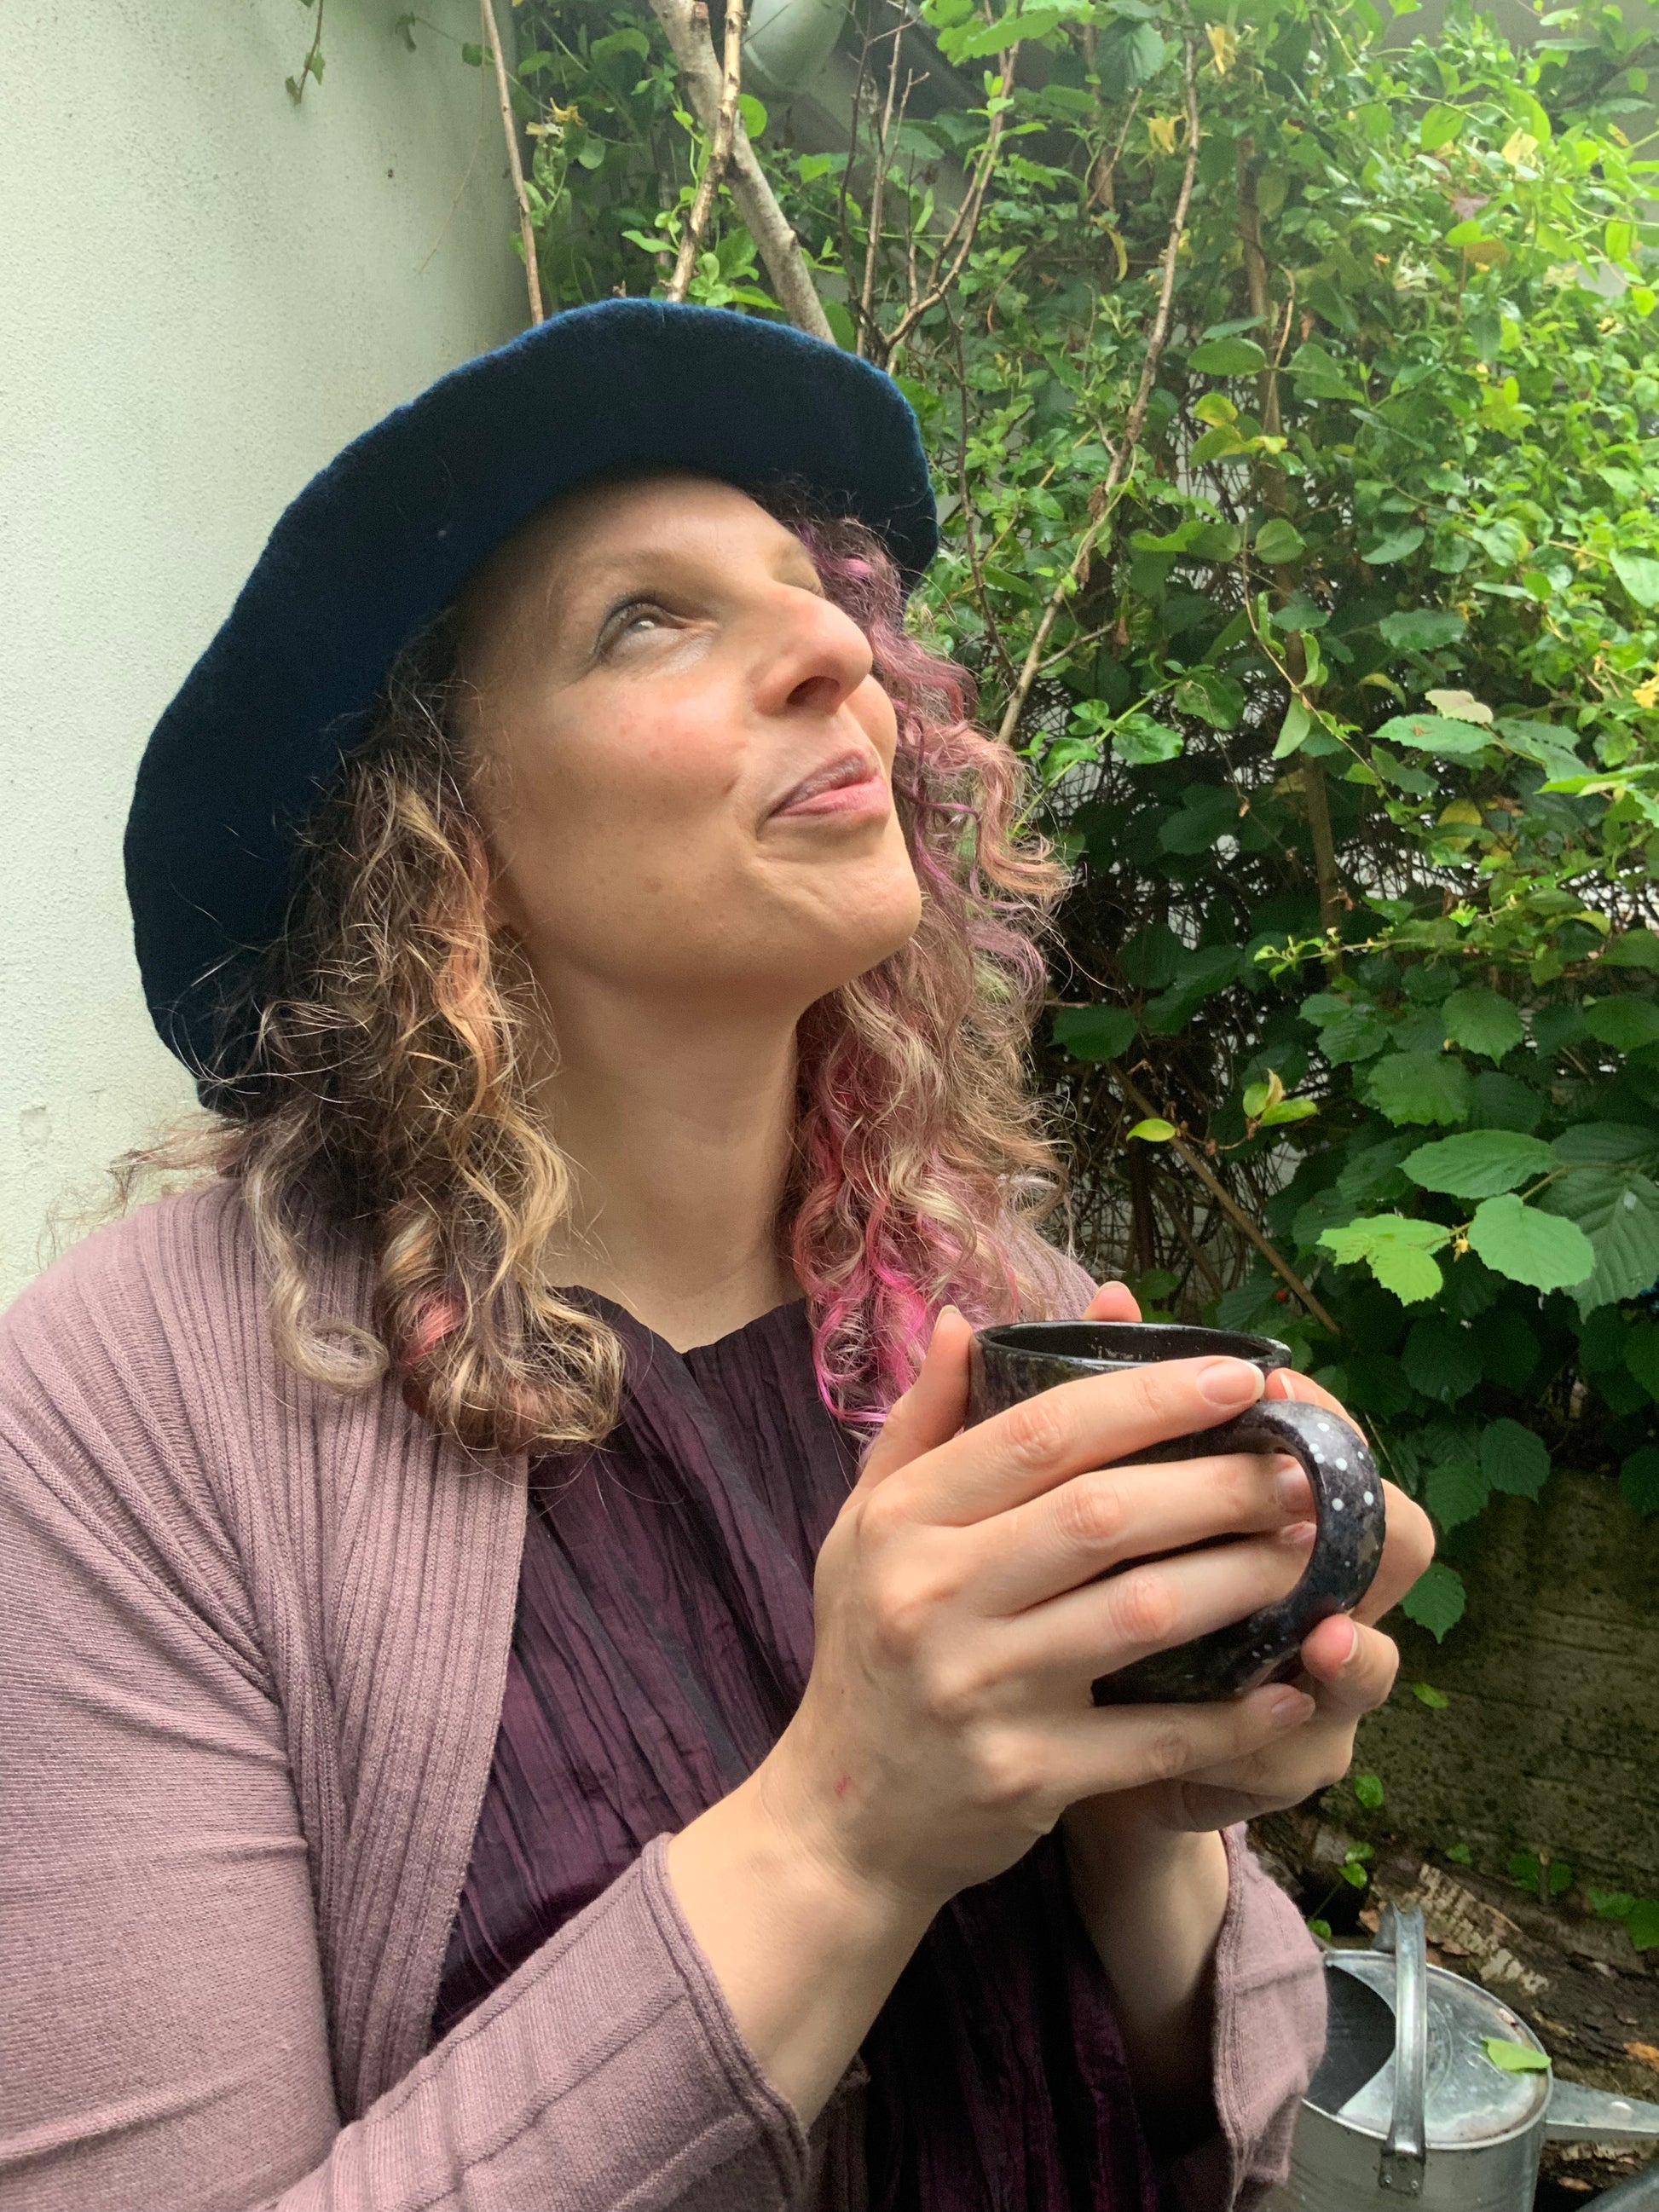 Sam sits in her garden in summer with a witchy hat and cup of tea